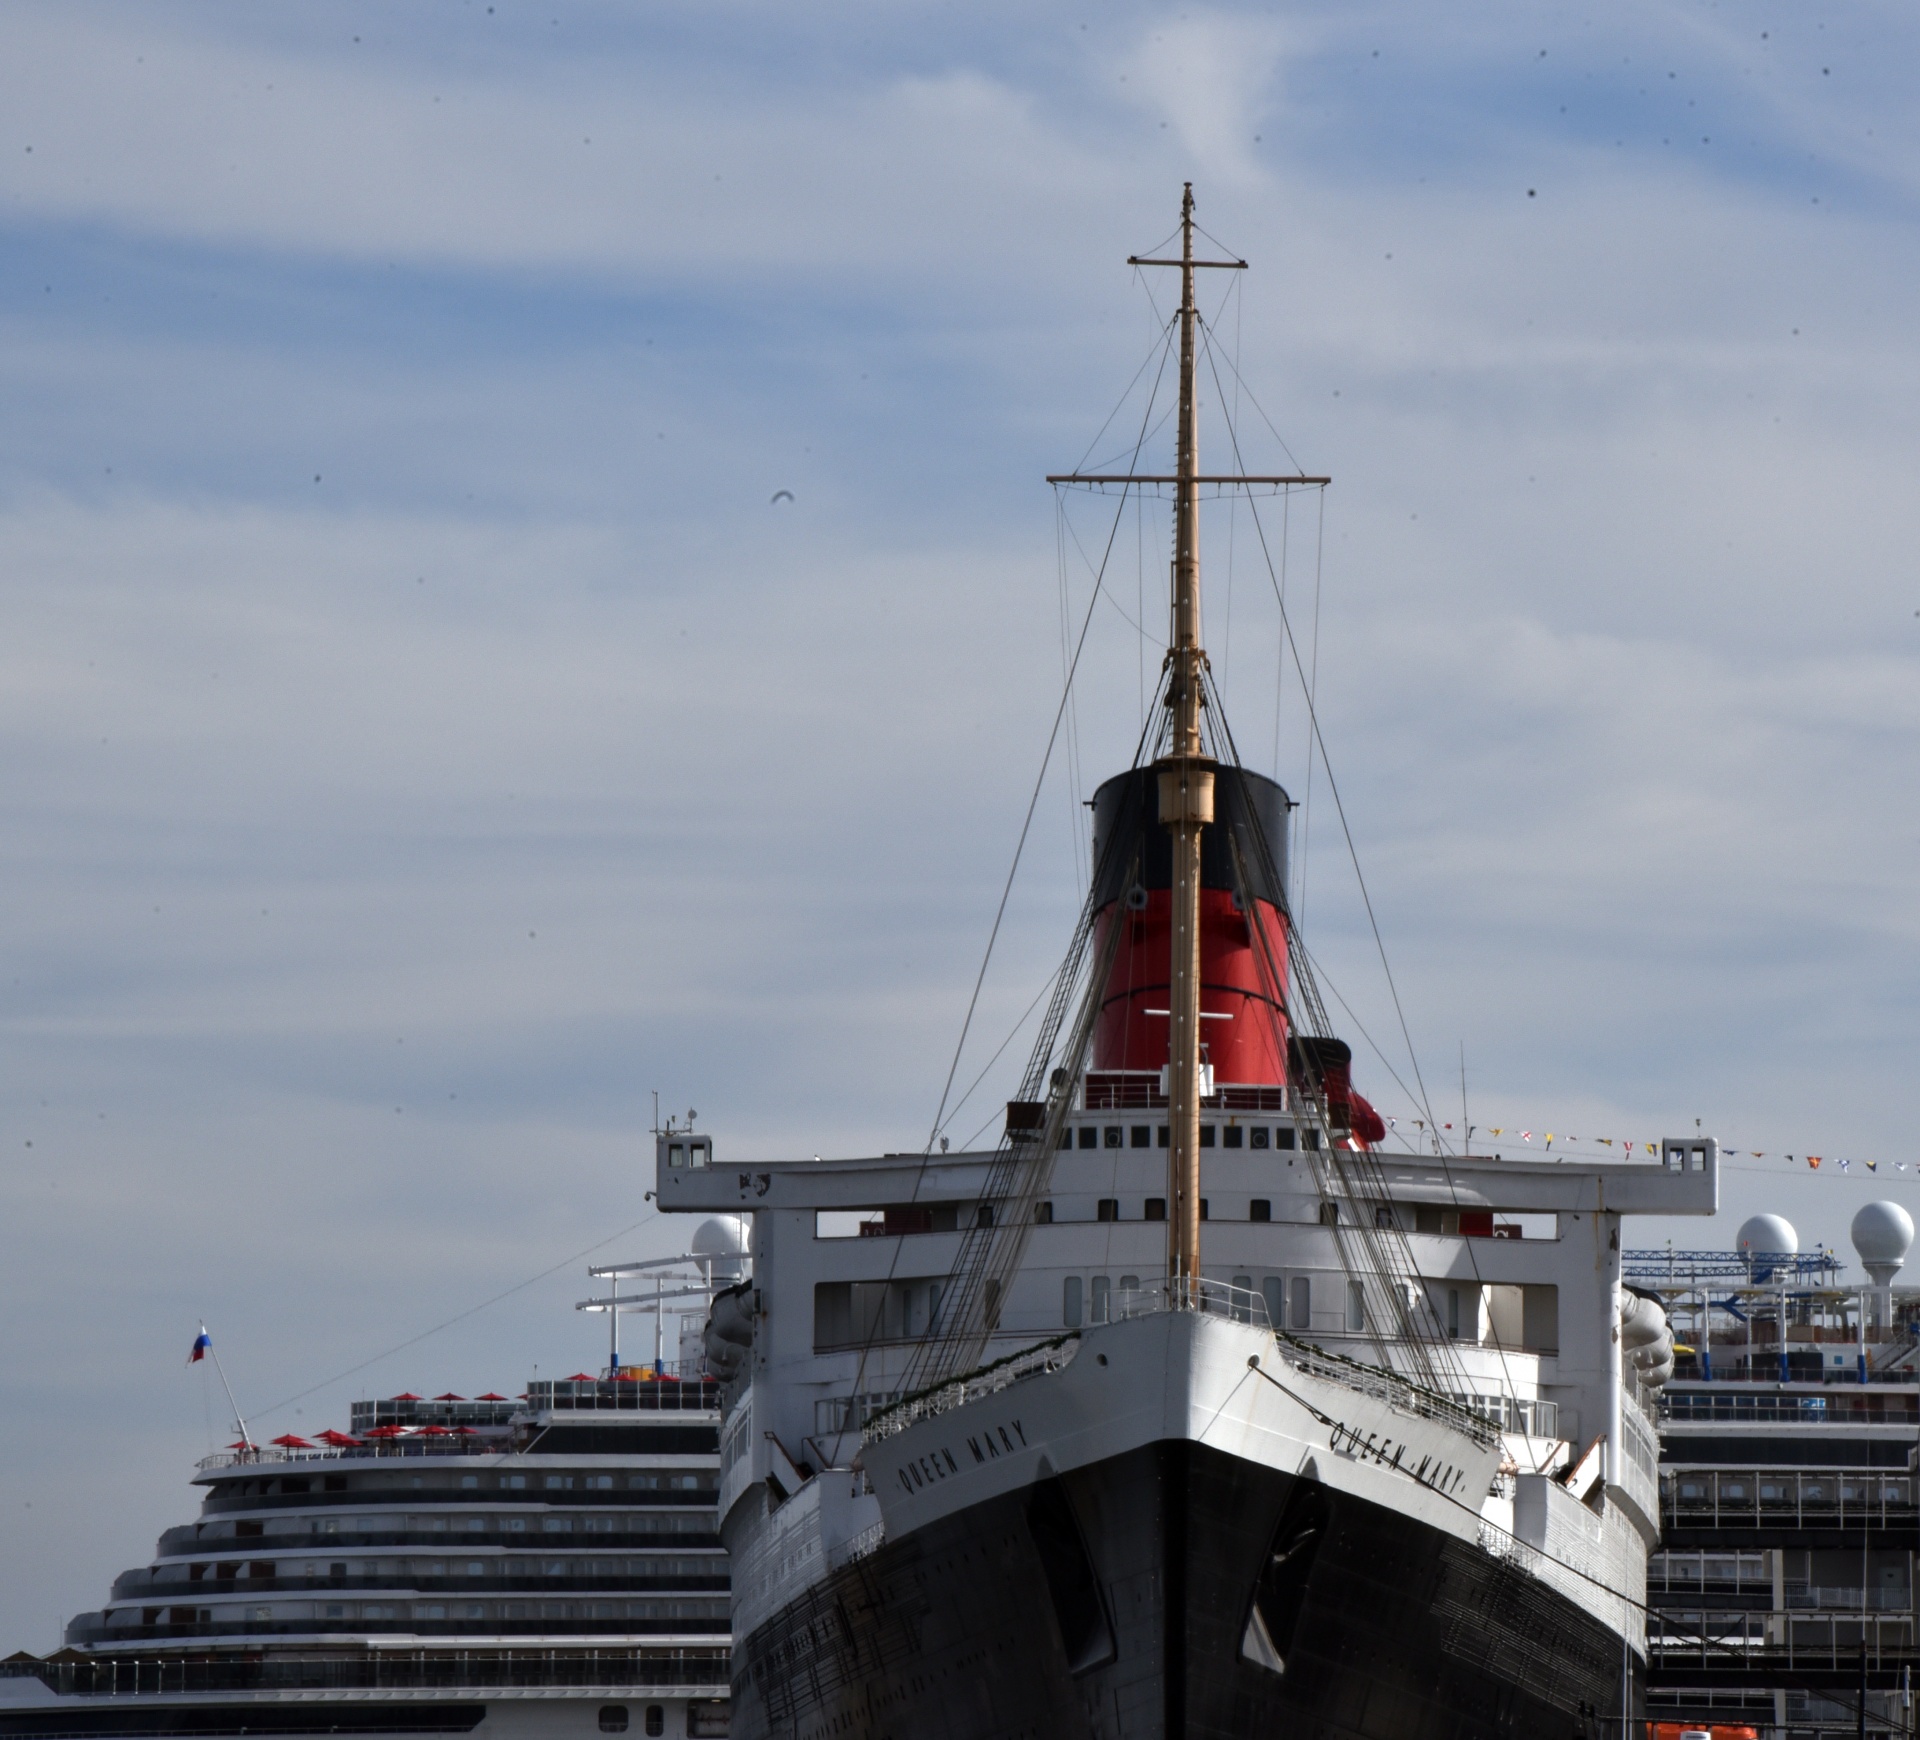 Nose view of the Queen Mary ocean liner ship in Long Beach harbor